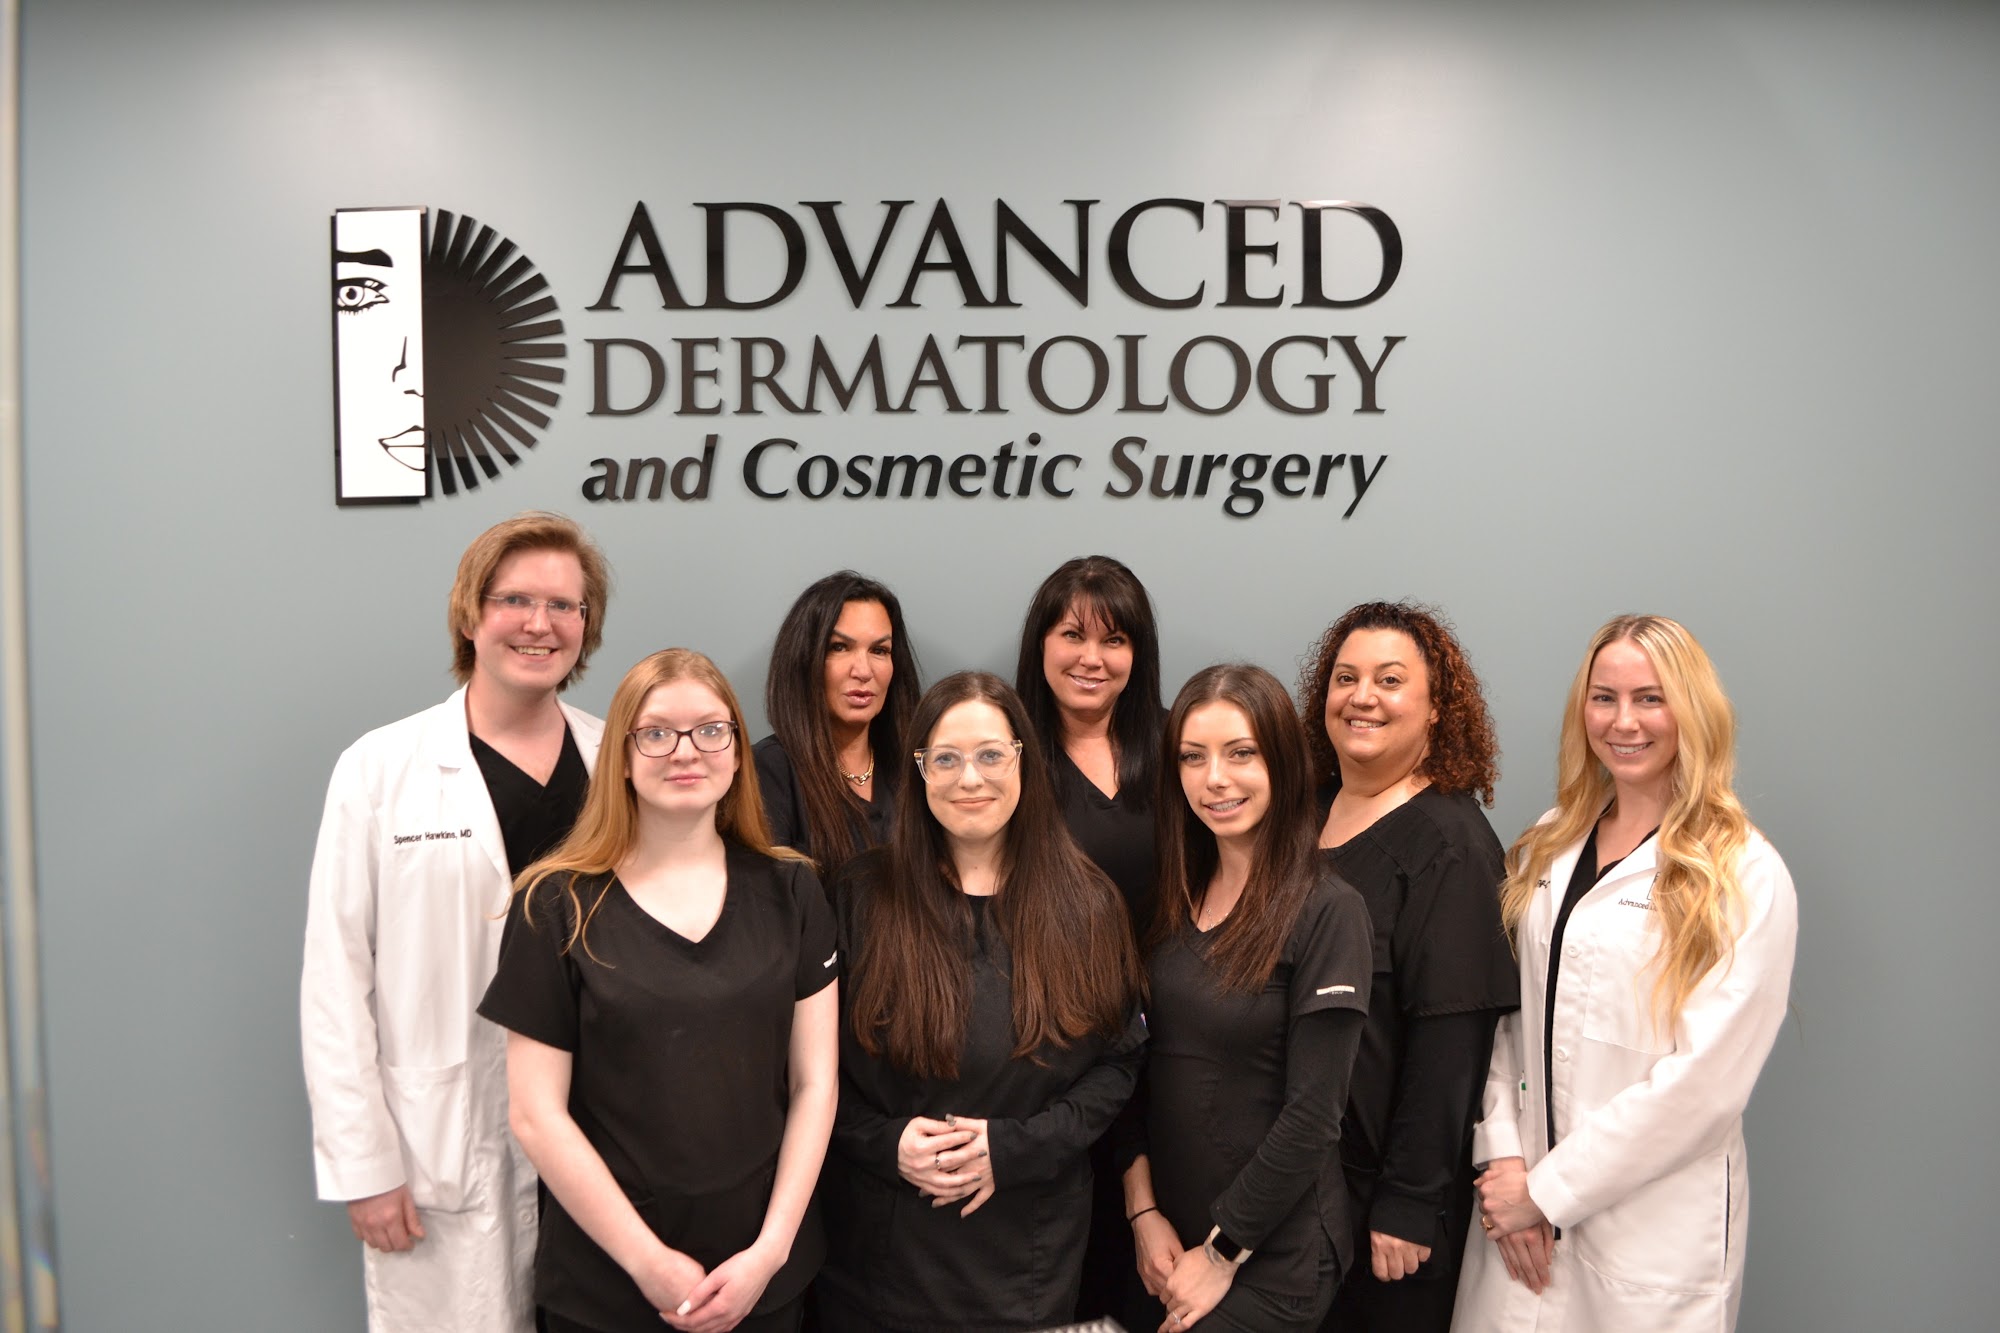 Advanced Dermatology and Cosmetic Surgery - East Greenwich